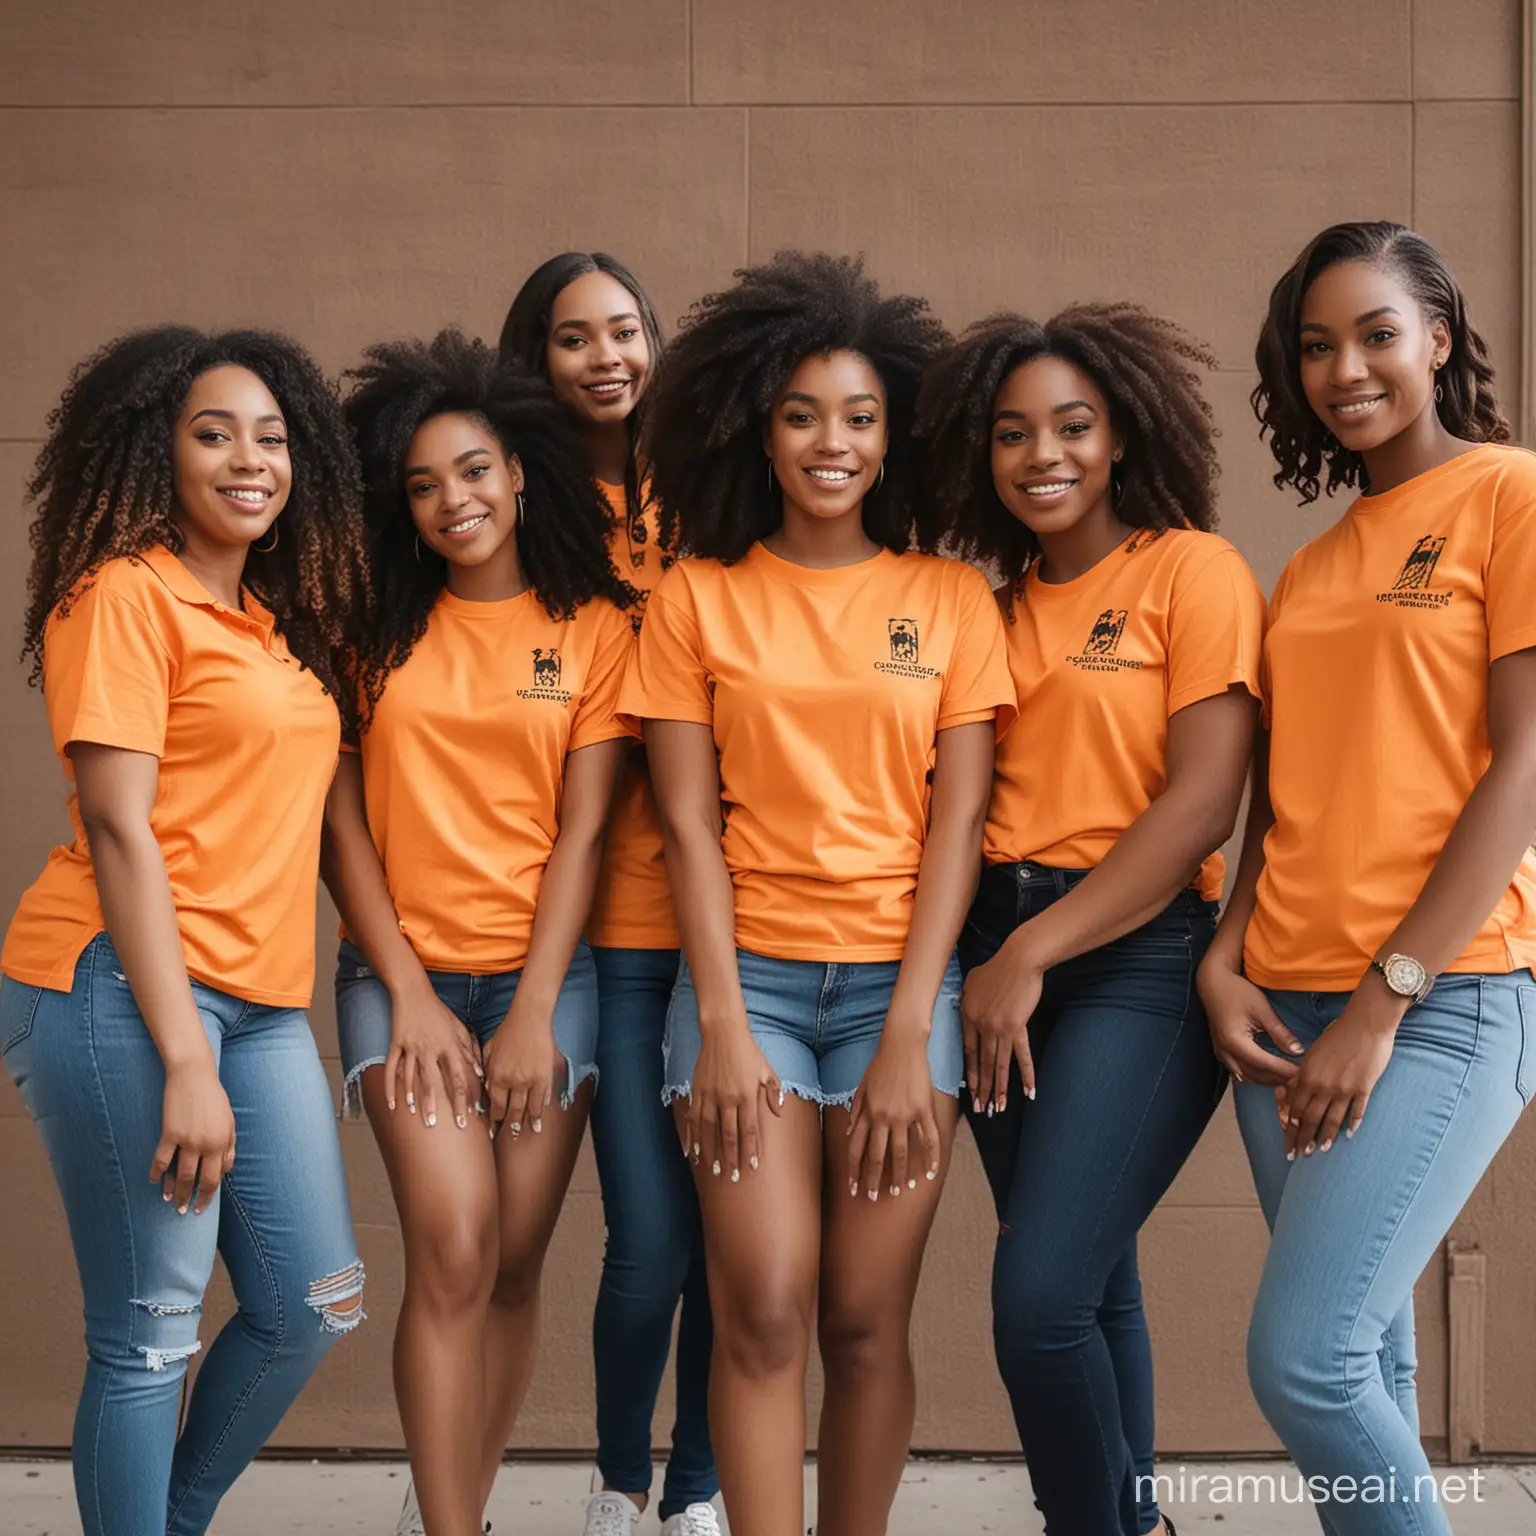 group of young black women and men dressed in orange shirts